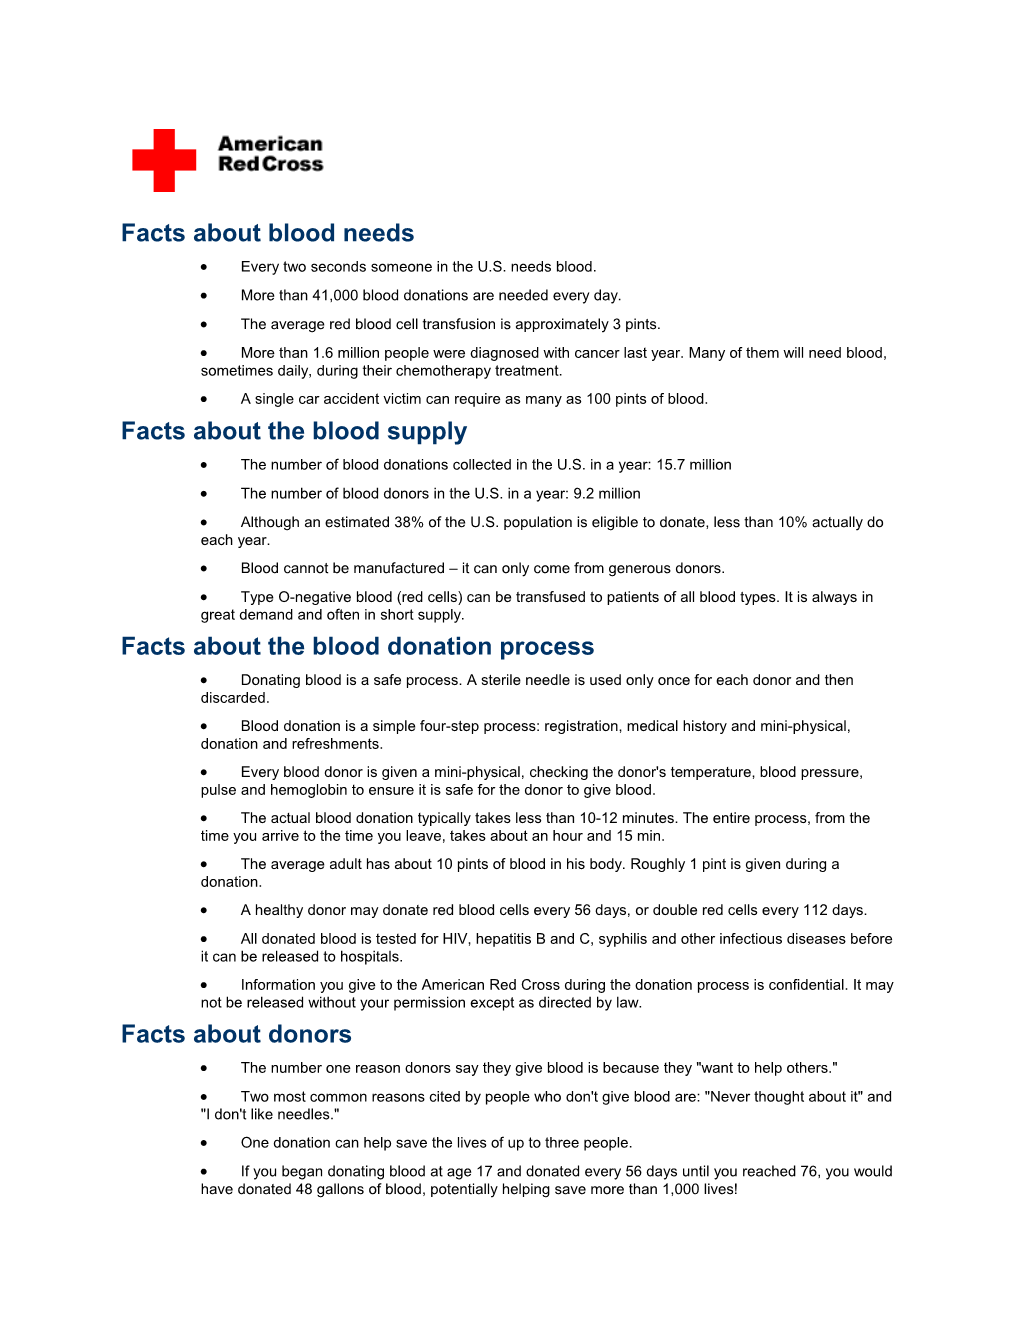 Facts About Blood Needs